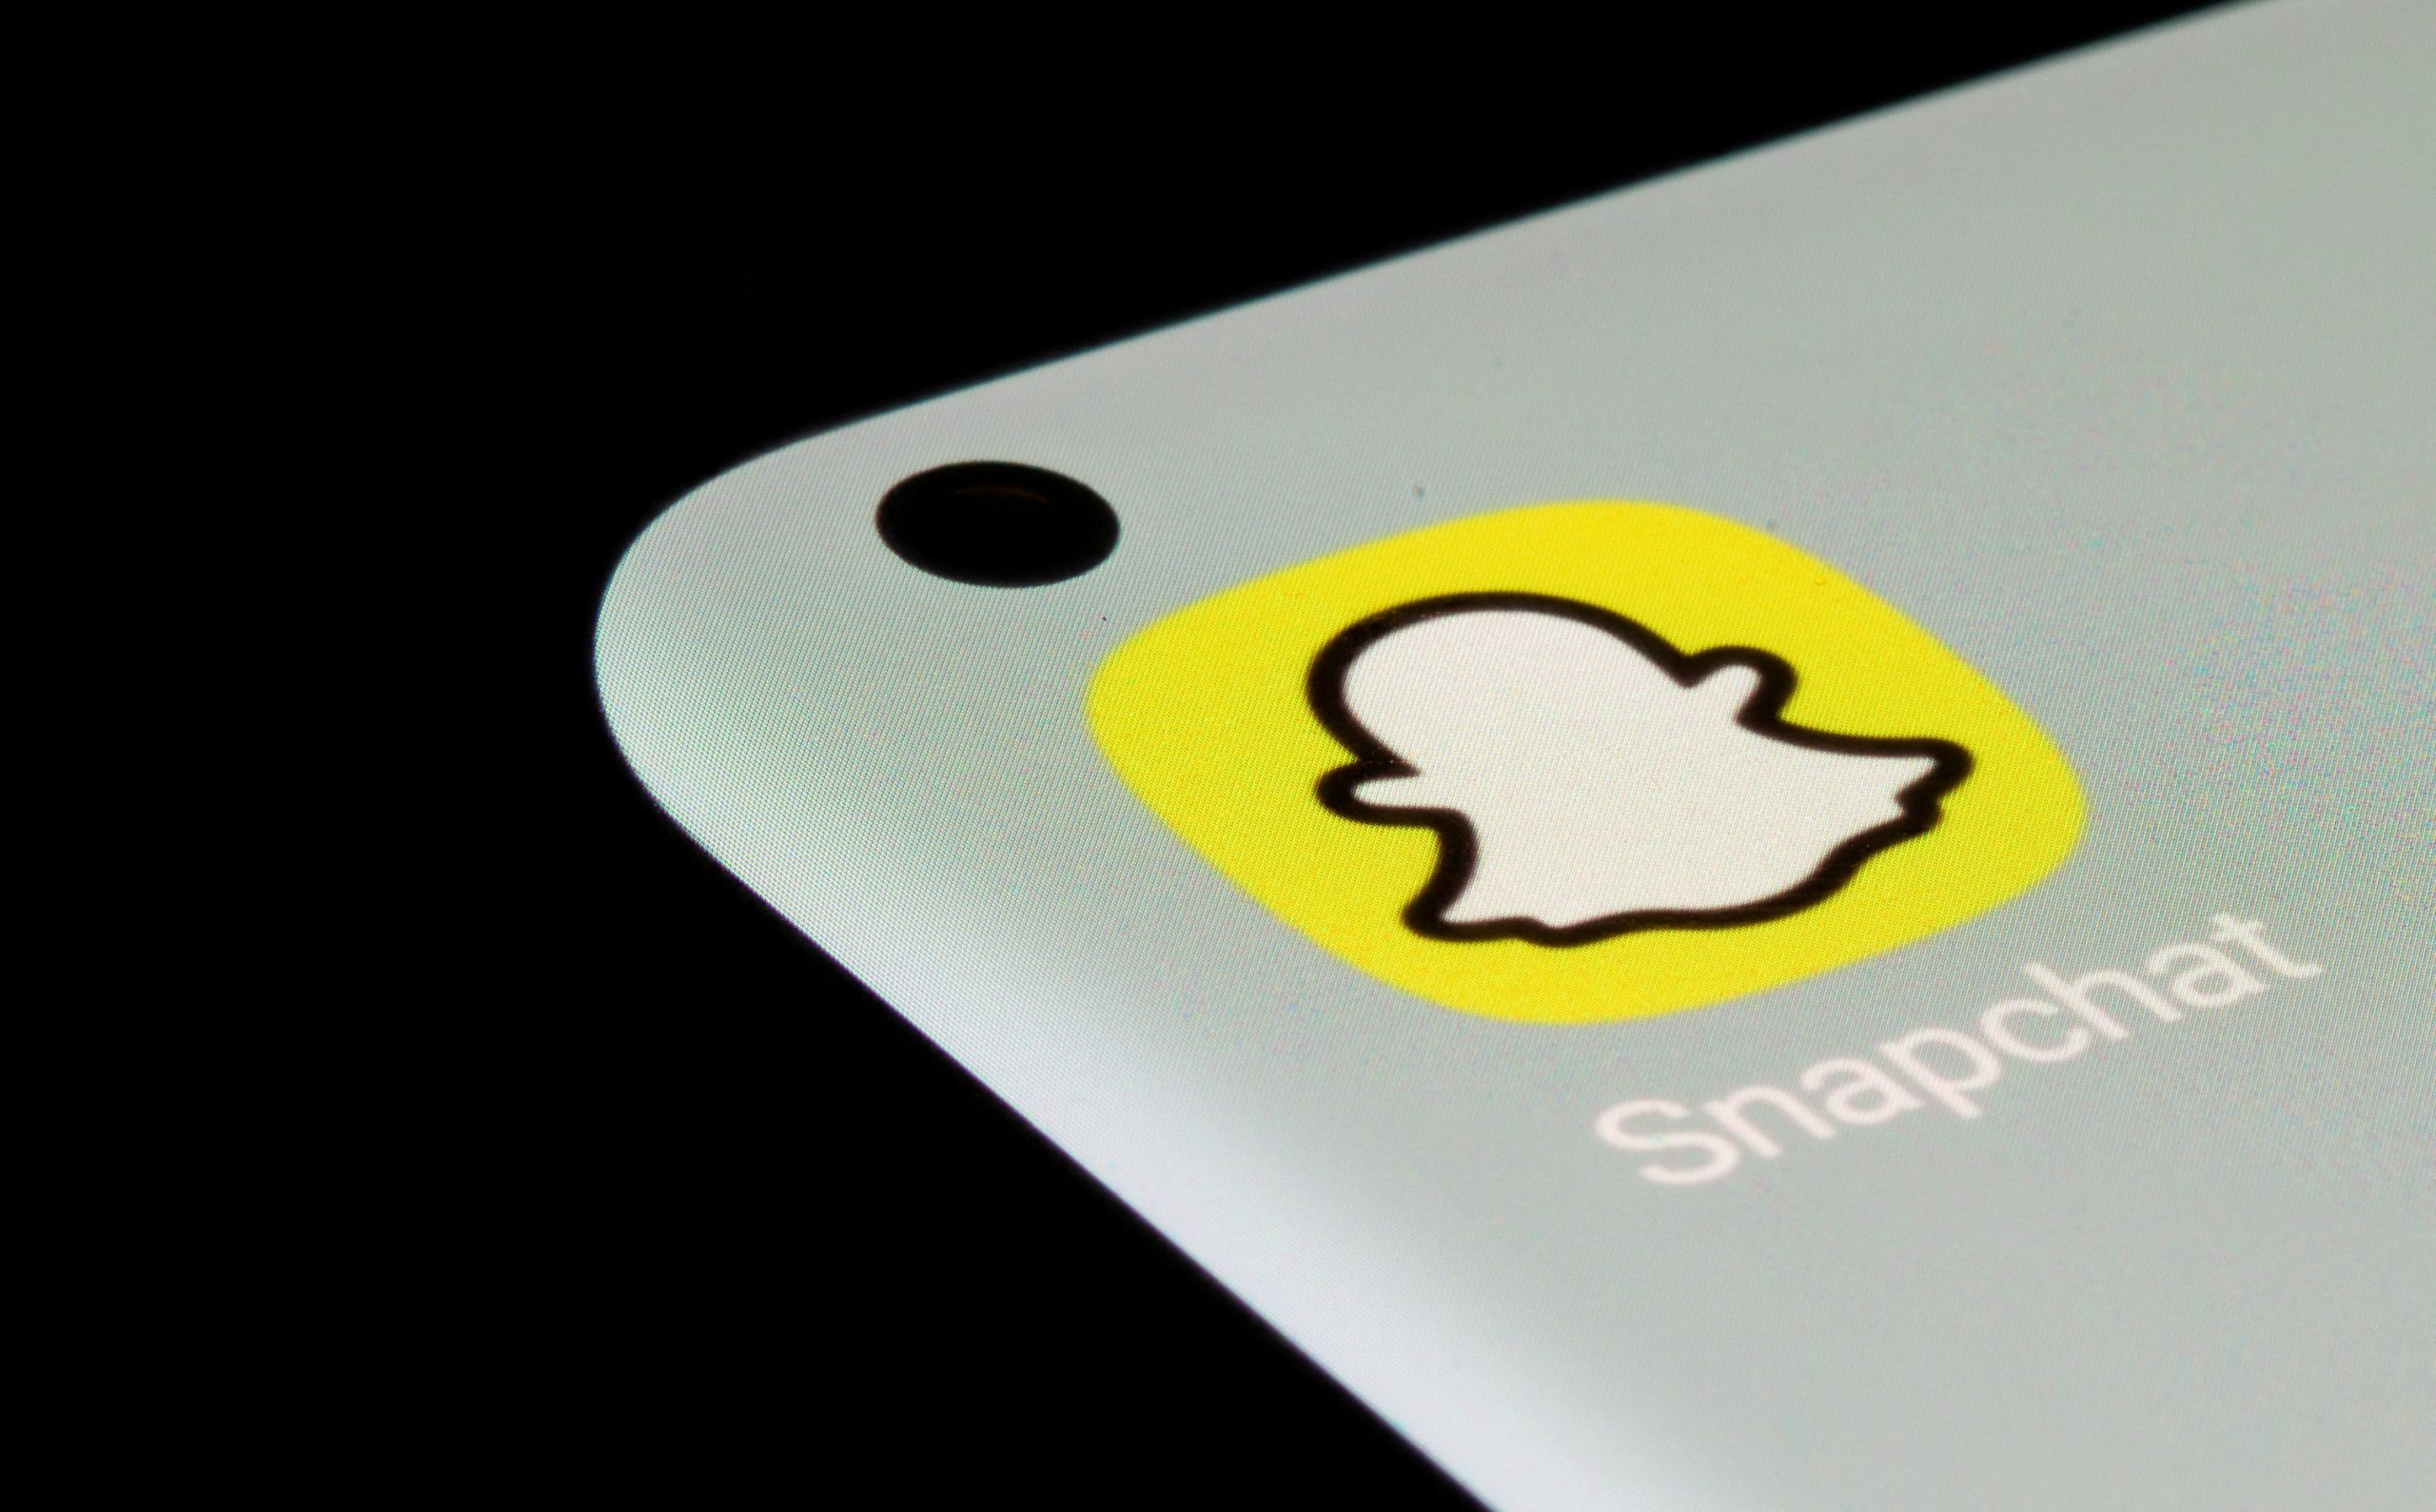 file-photo-snapchat-app-is-seen-on-a-smartphone-in-this-illustration